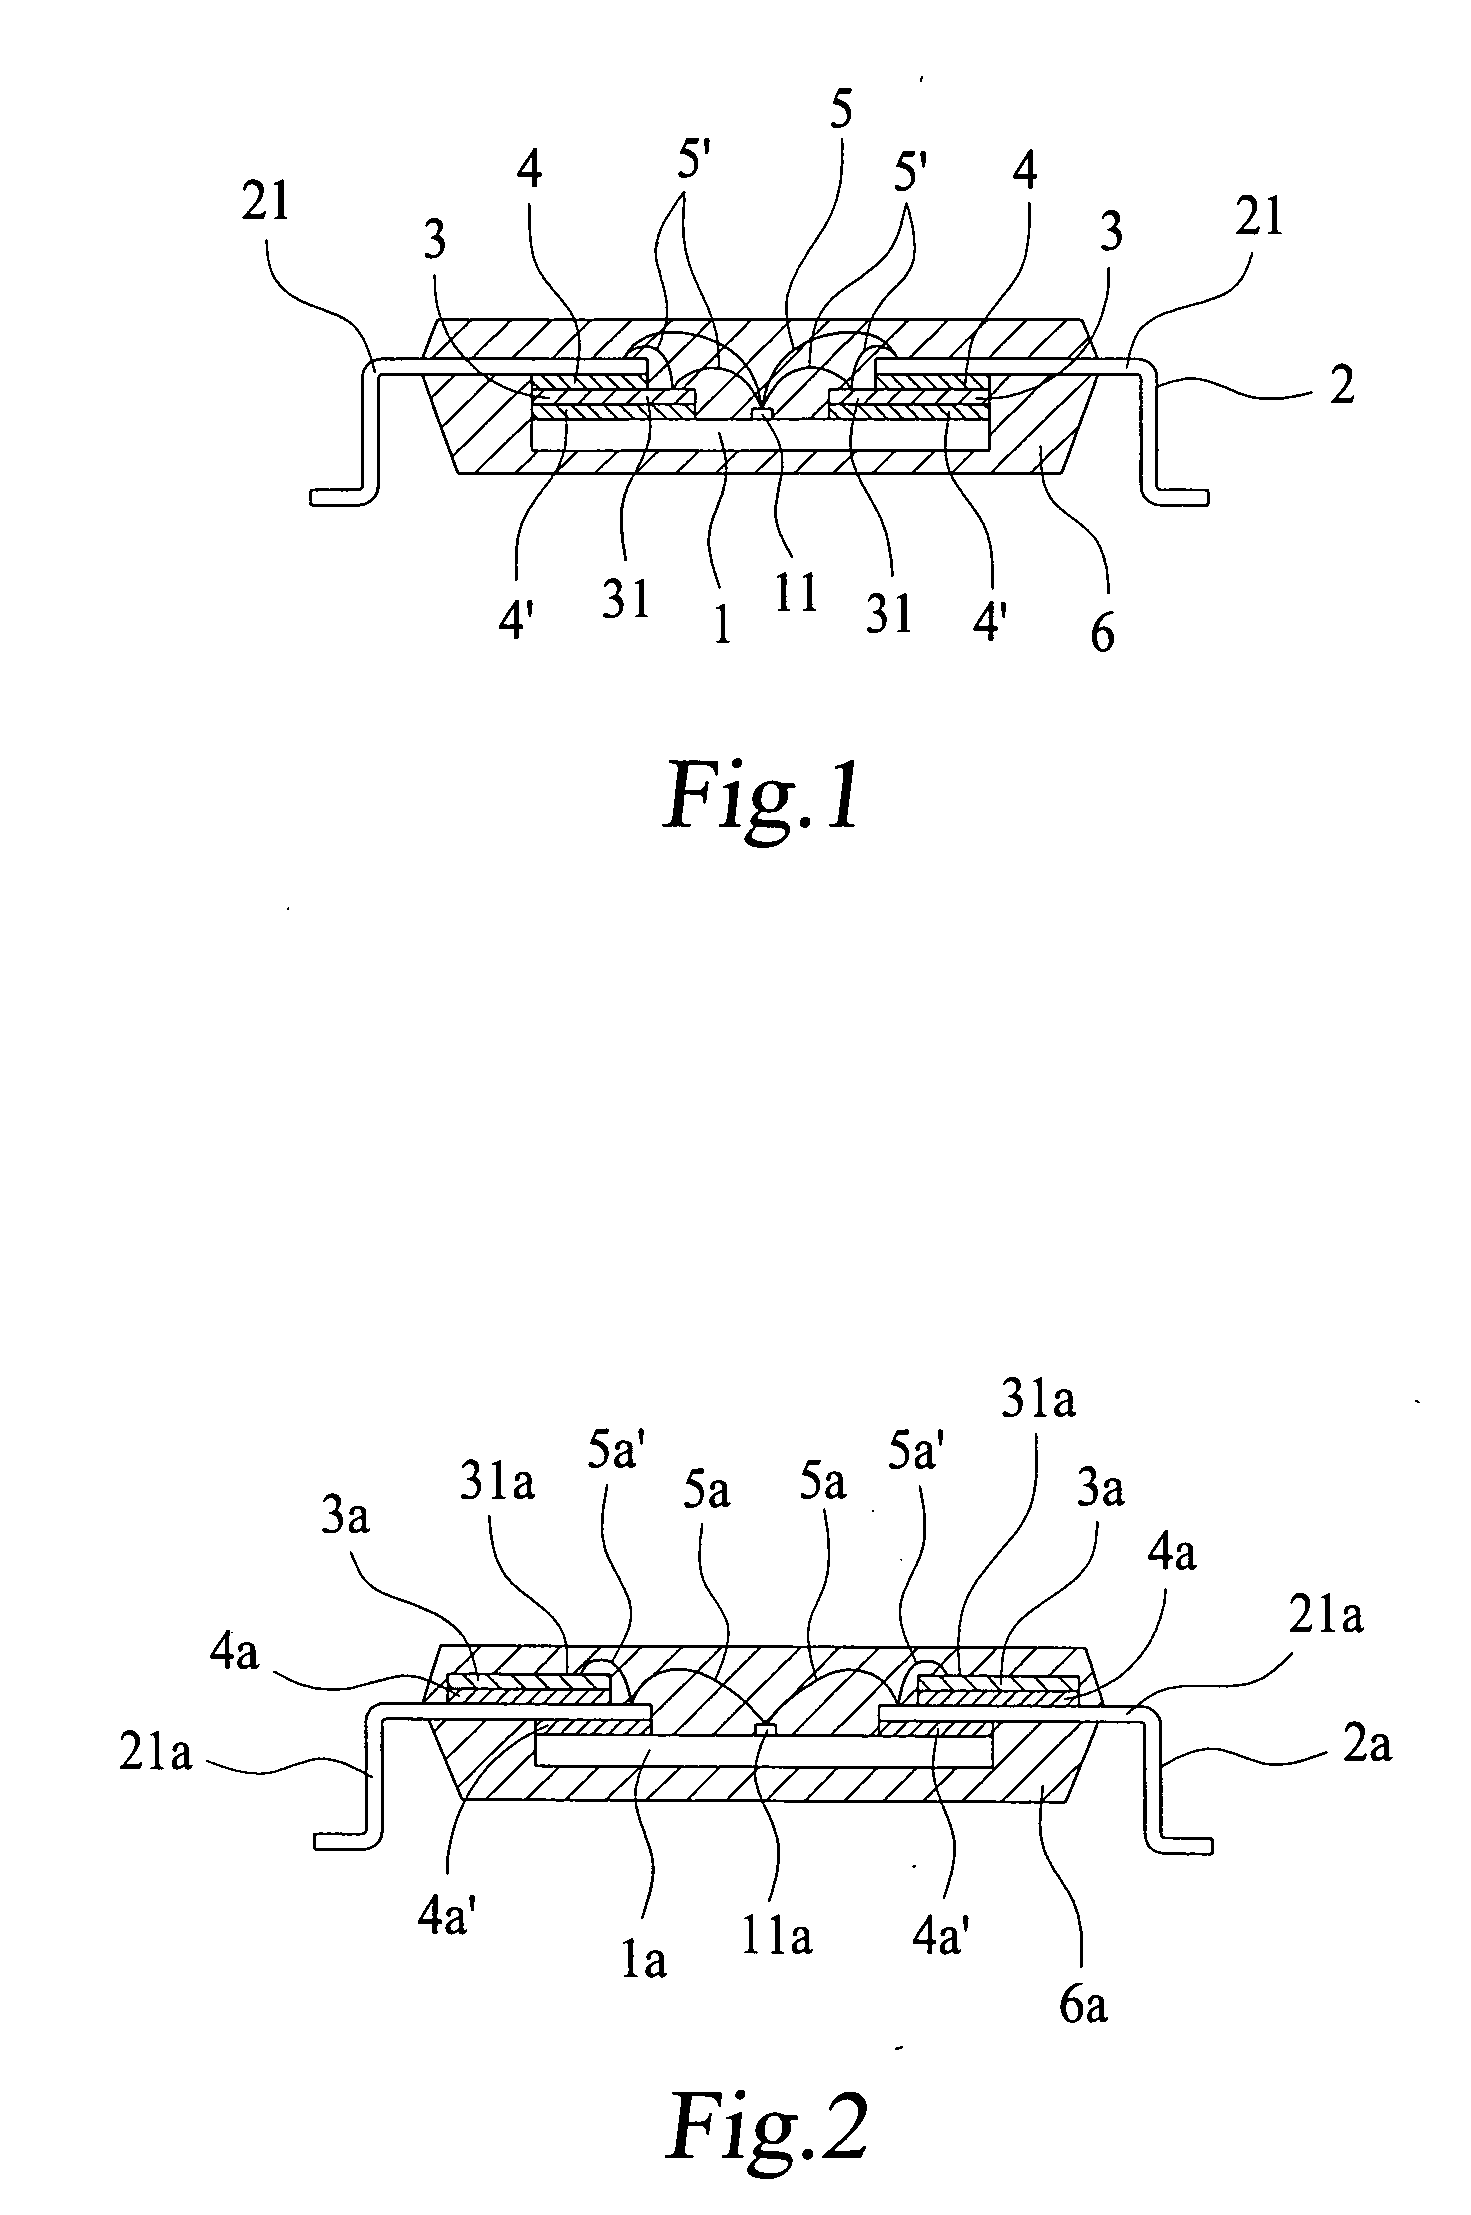 Packaged chip capable of lowering characteristic impedance